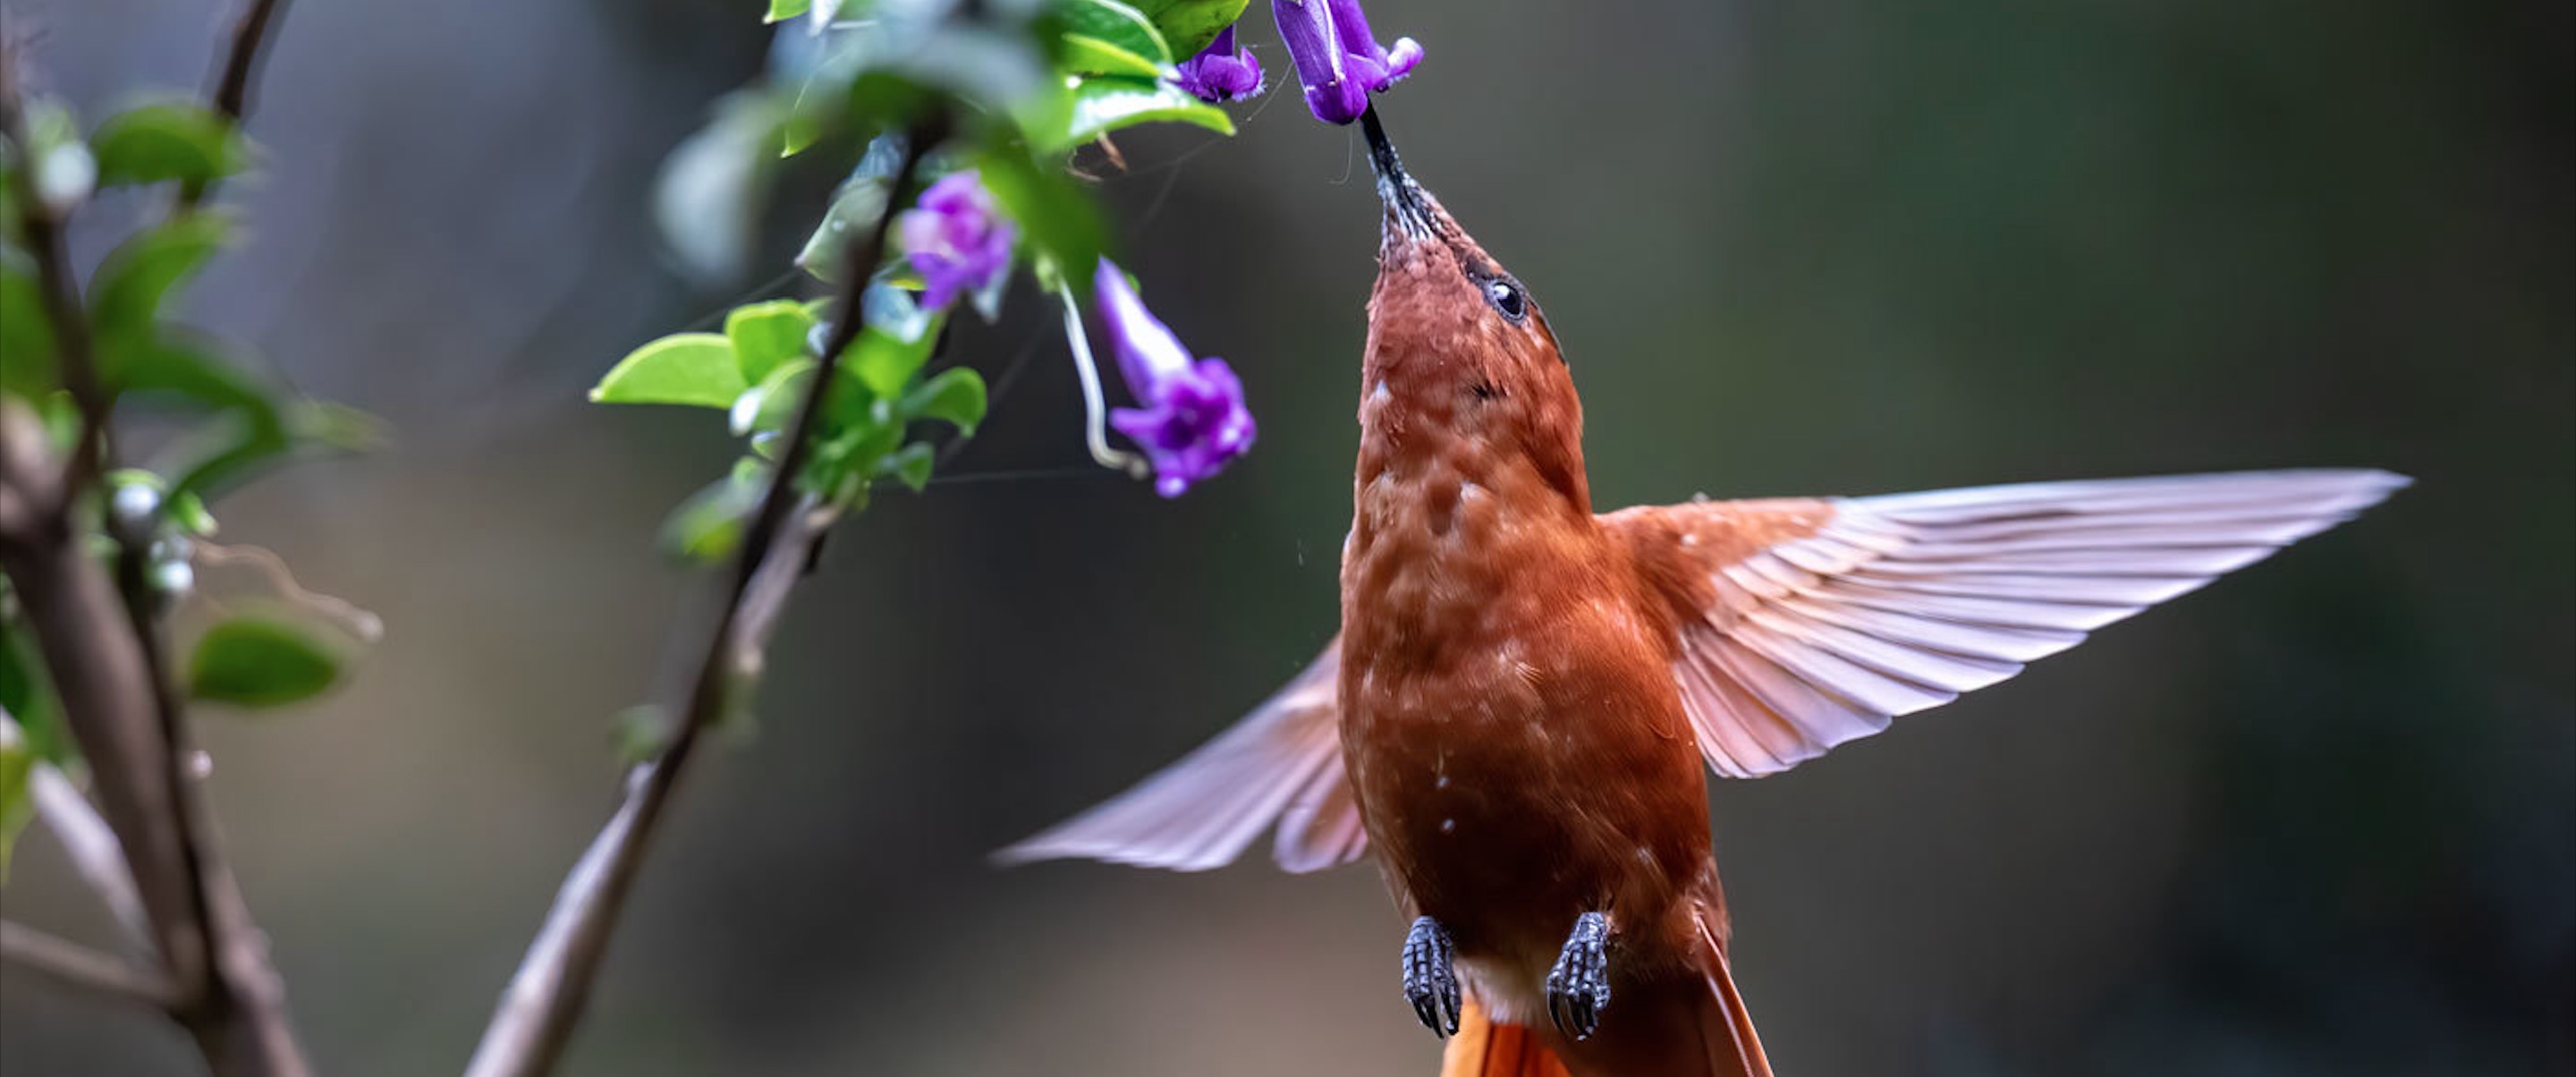 A reddish-brown hummingbird feeding from a purple flower while hovering mid-air in a garden.